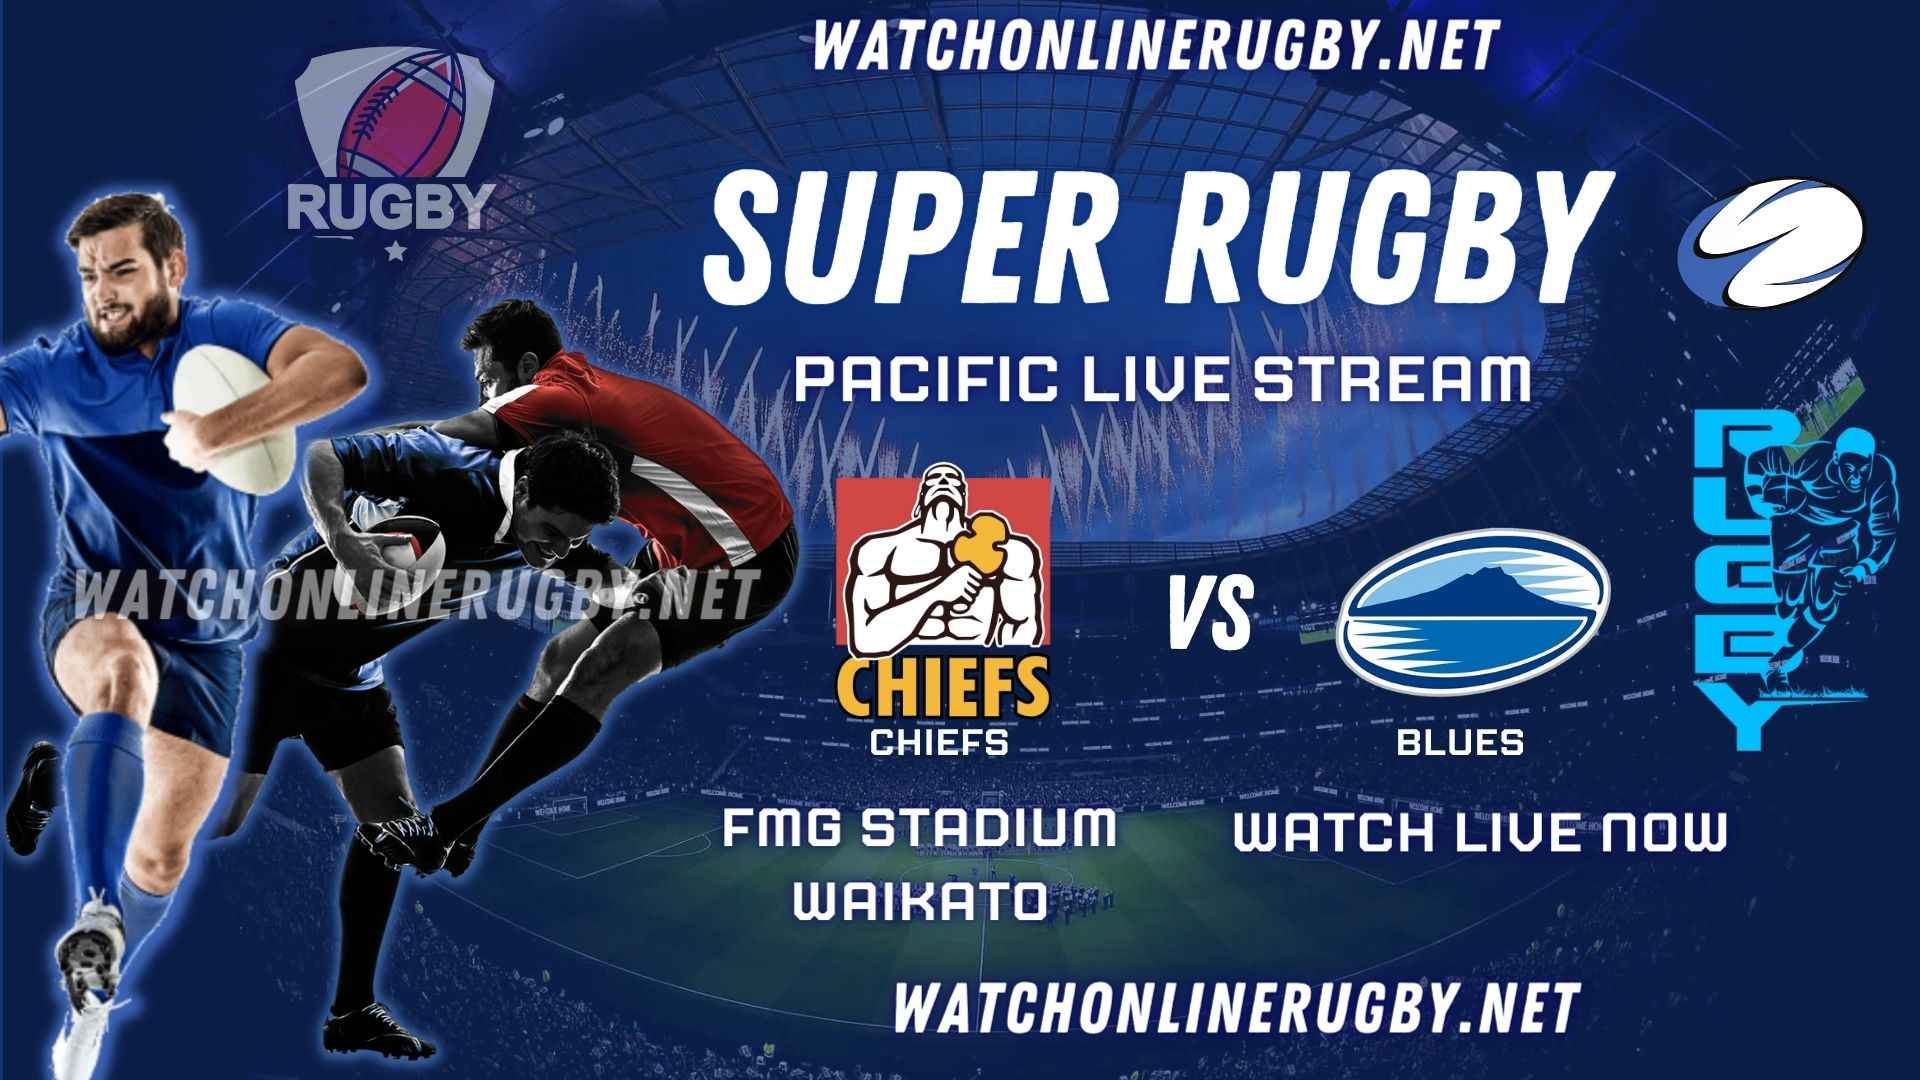 Live Blues Vs Chiefs Rugby Online